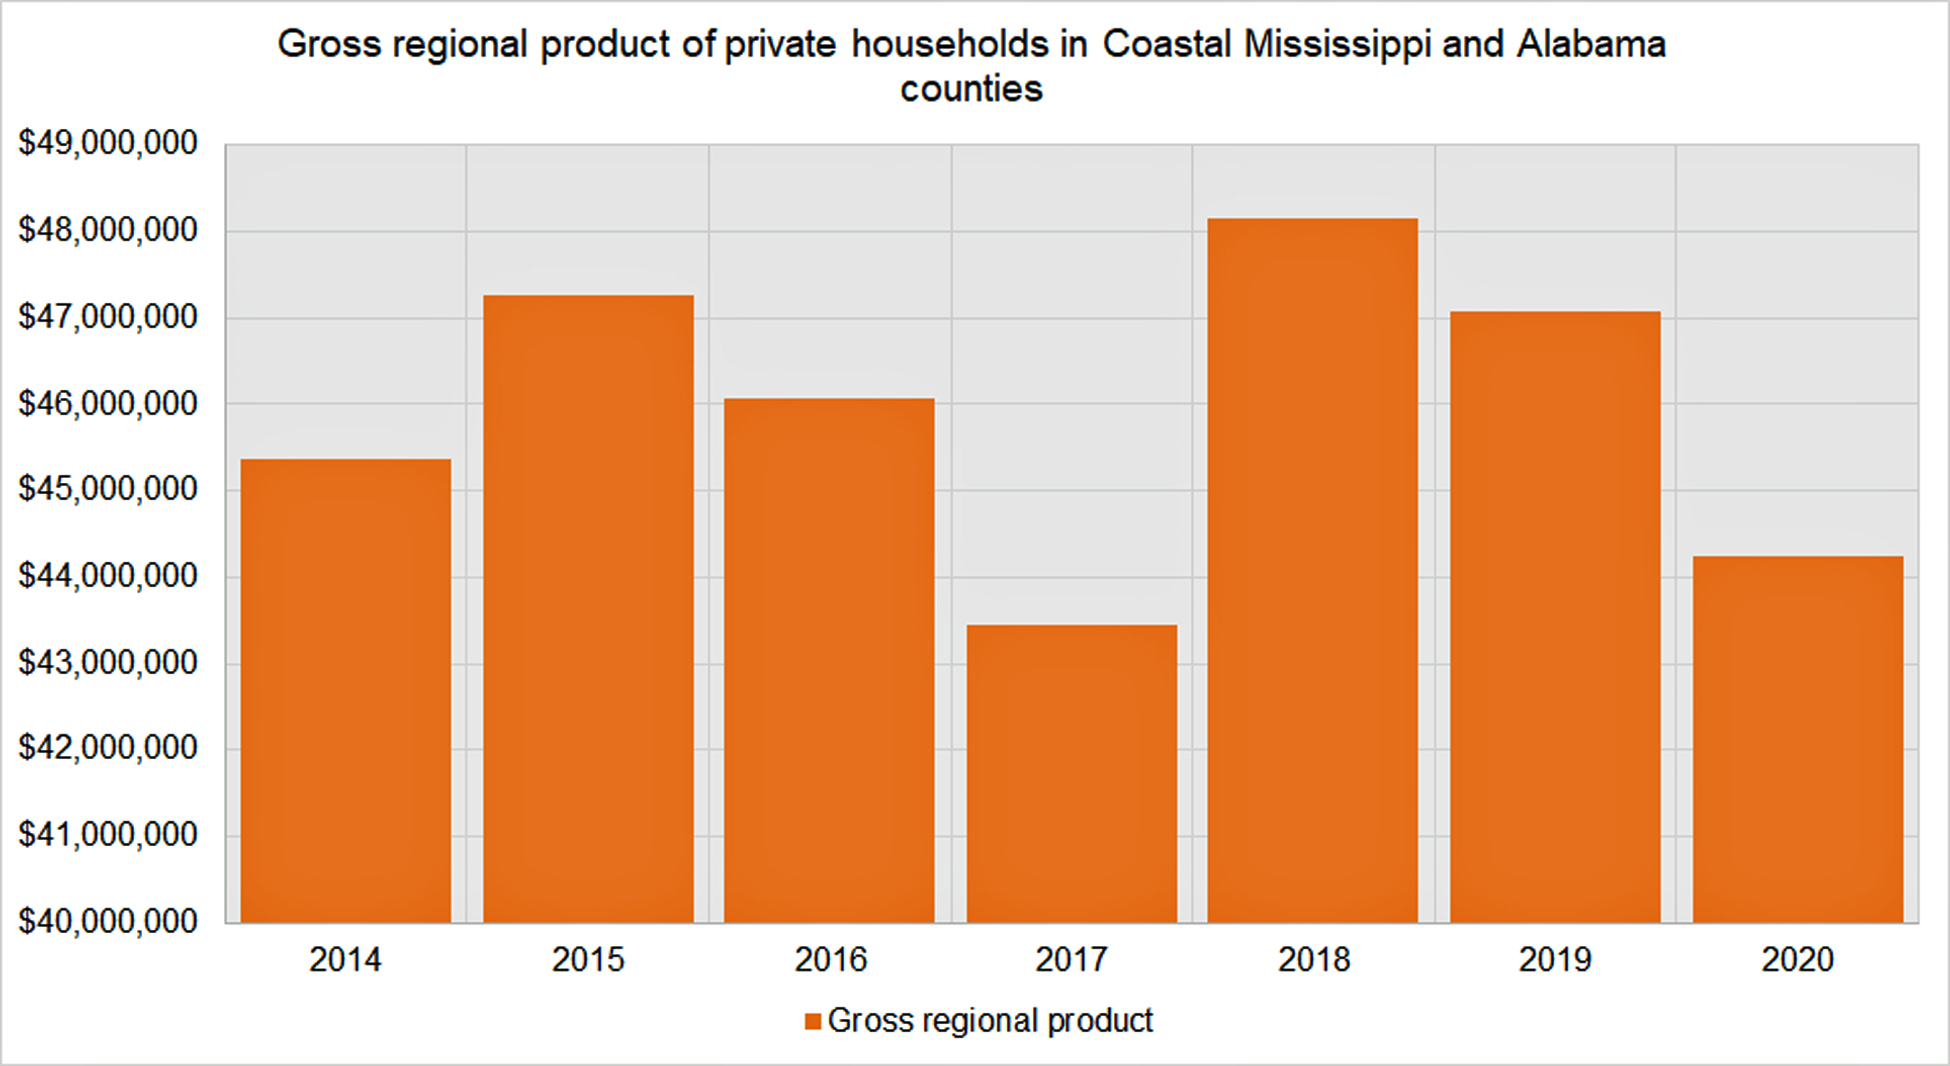 gross_regional_product_of_private_households_in_coastal_ms_and_al.jpg